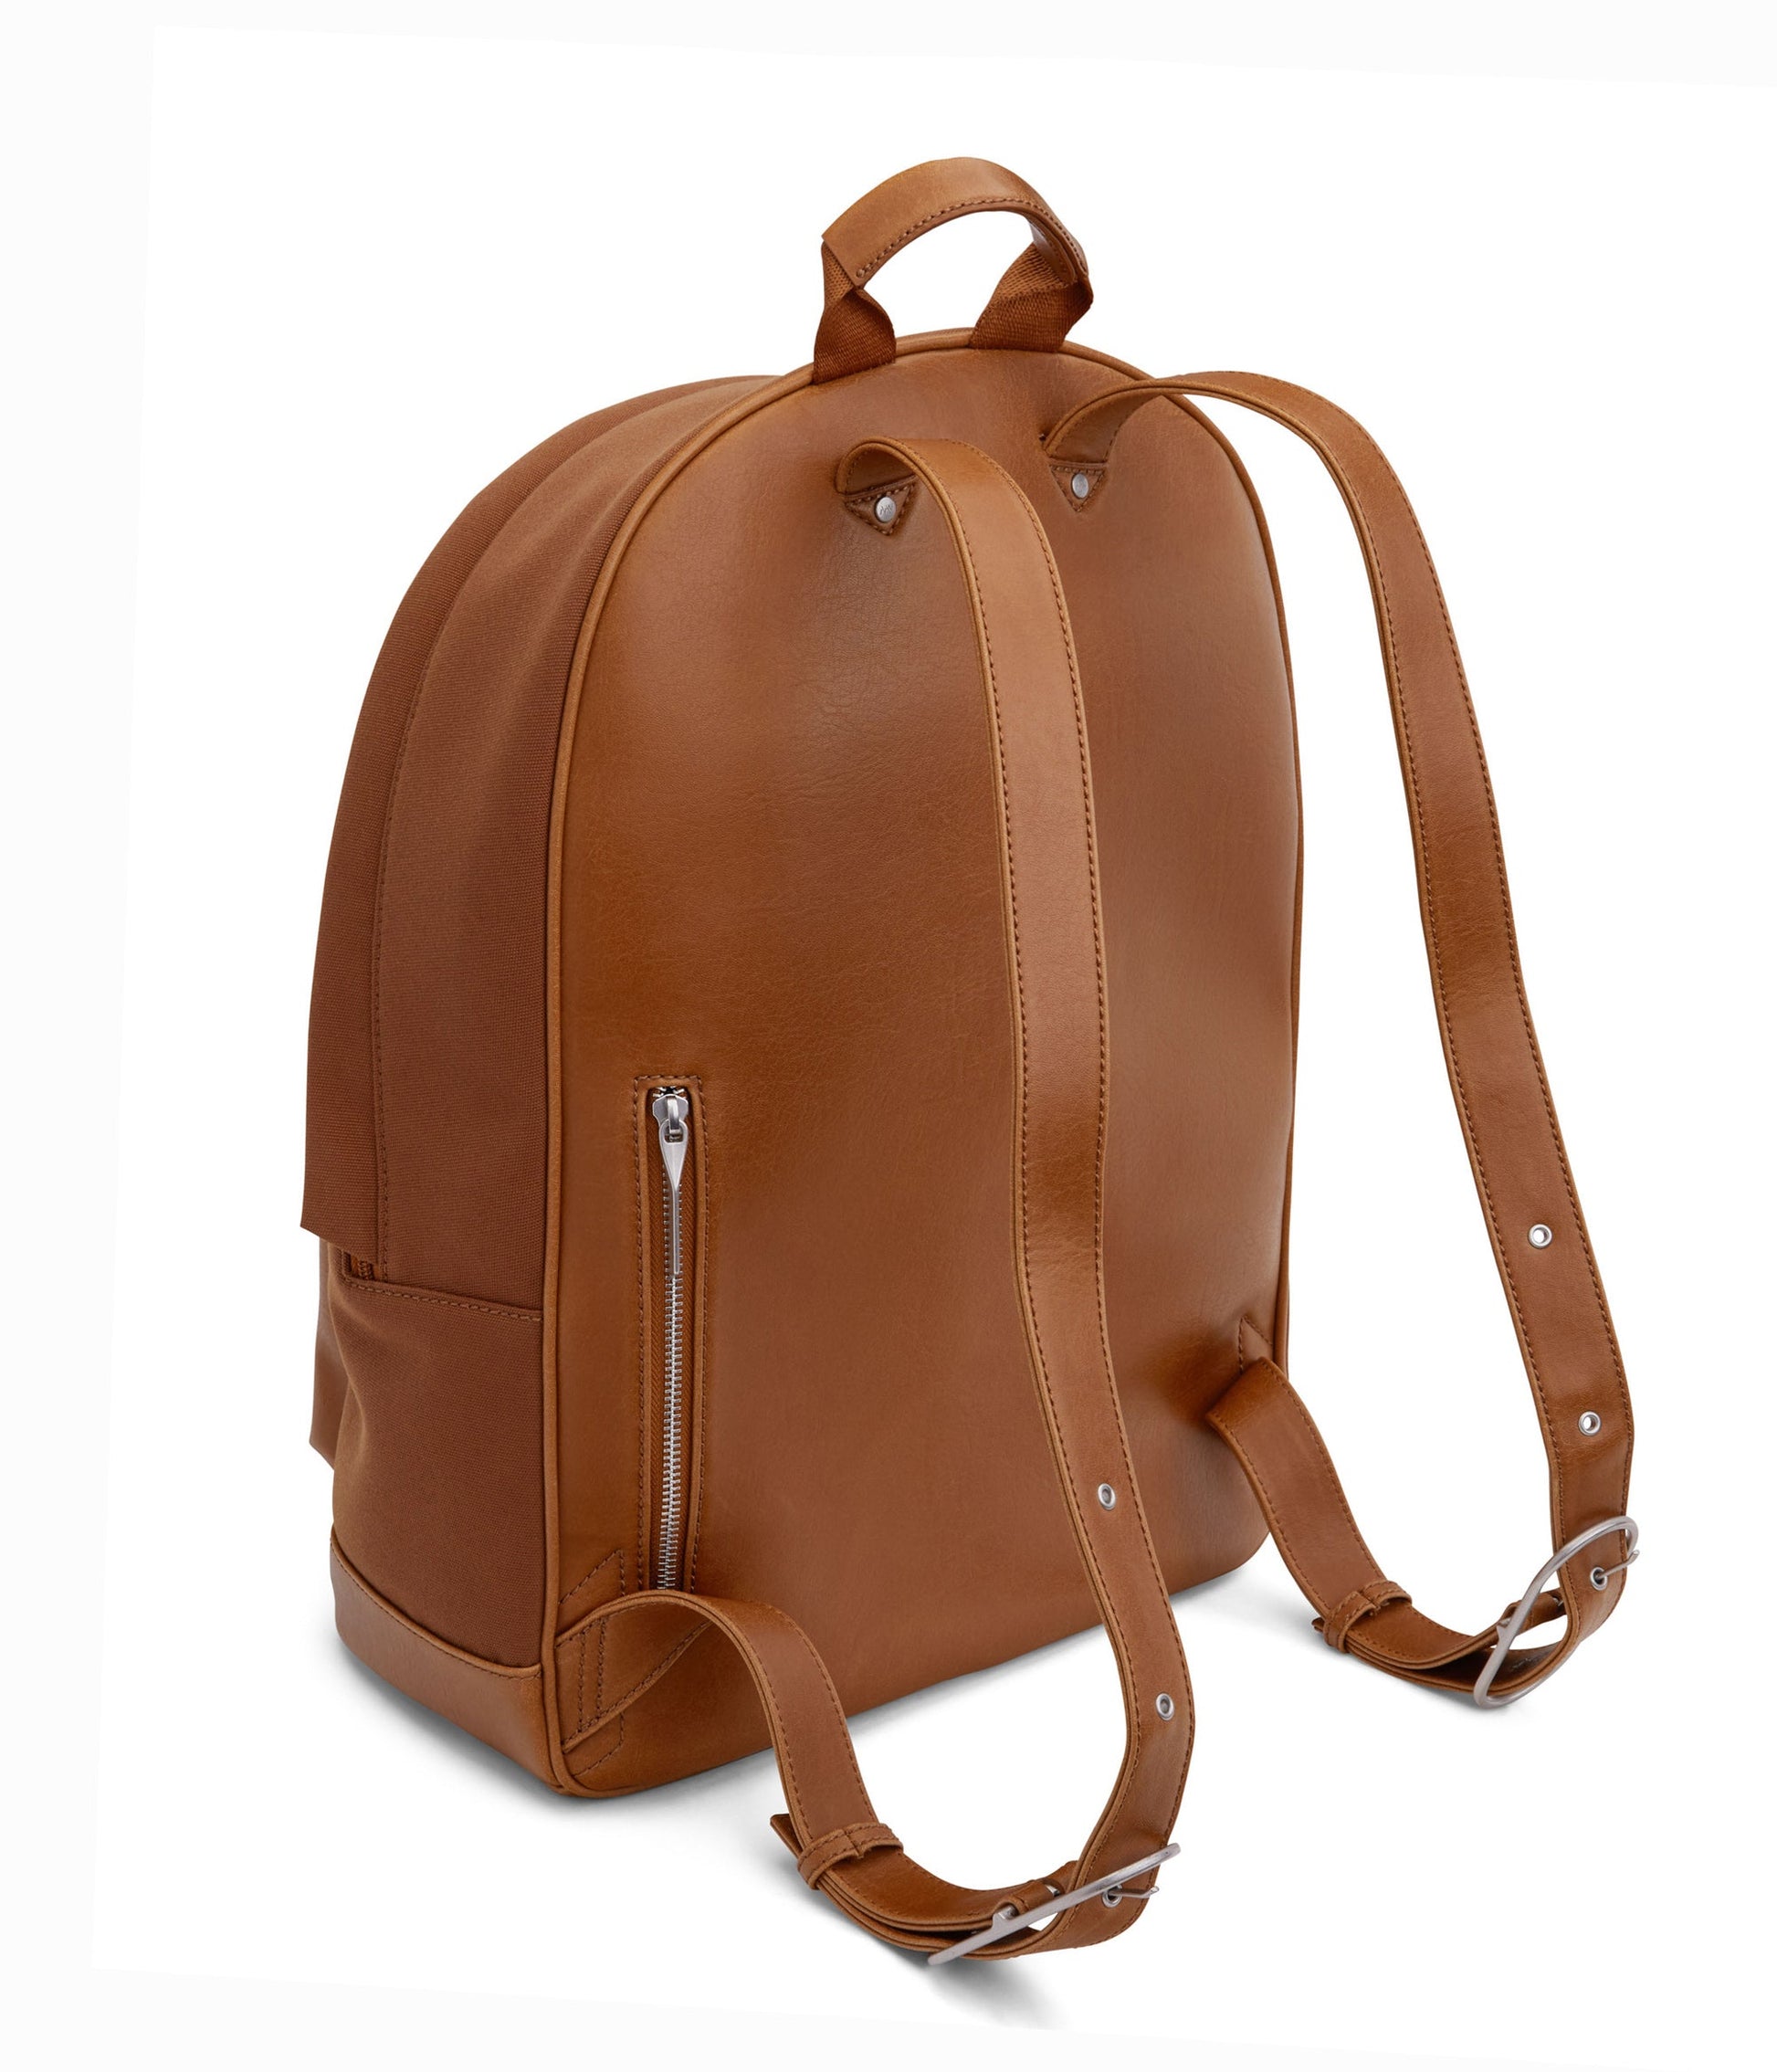 MKF Collection Backpack for Women Vegan Leather Bookbag Top Handle Bag Lady  Fashion Pocketbook Travel bag, Coffee-cognac Brown, Kimberly : Amazon.in:  Fashion